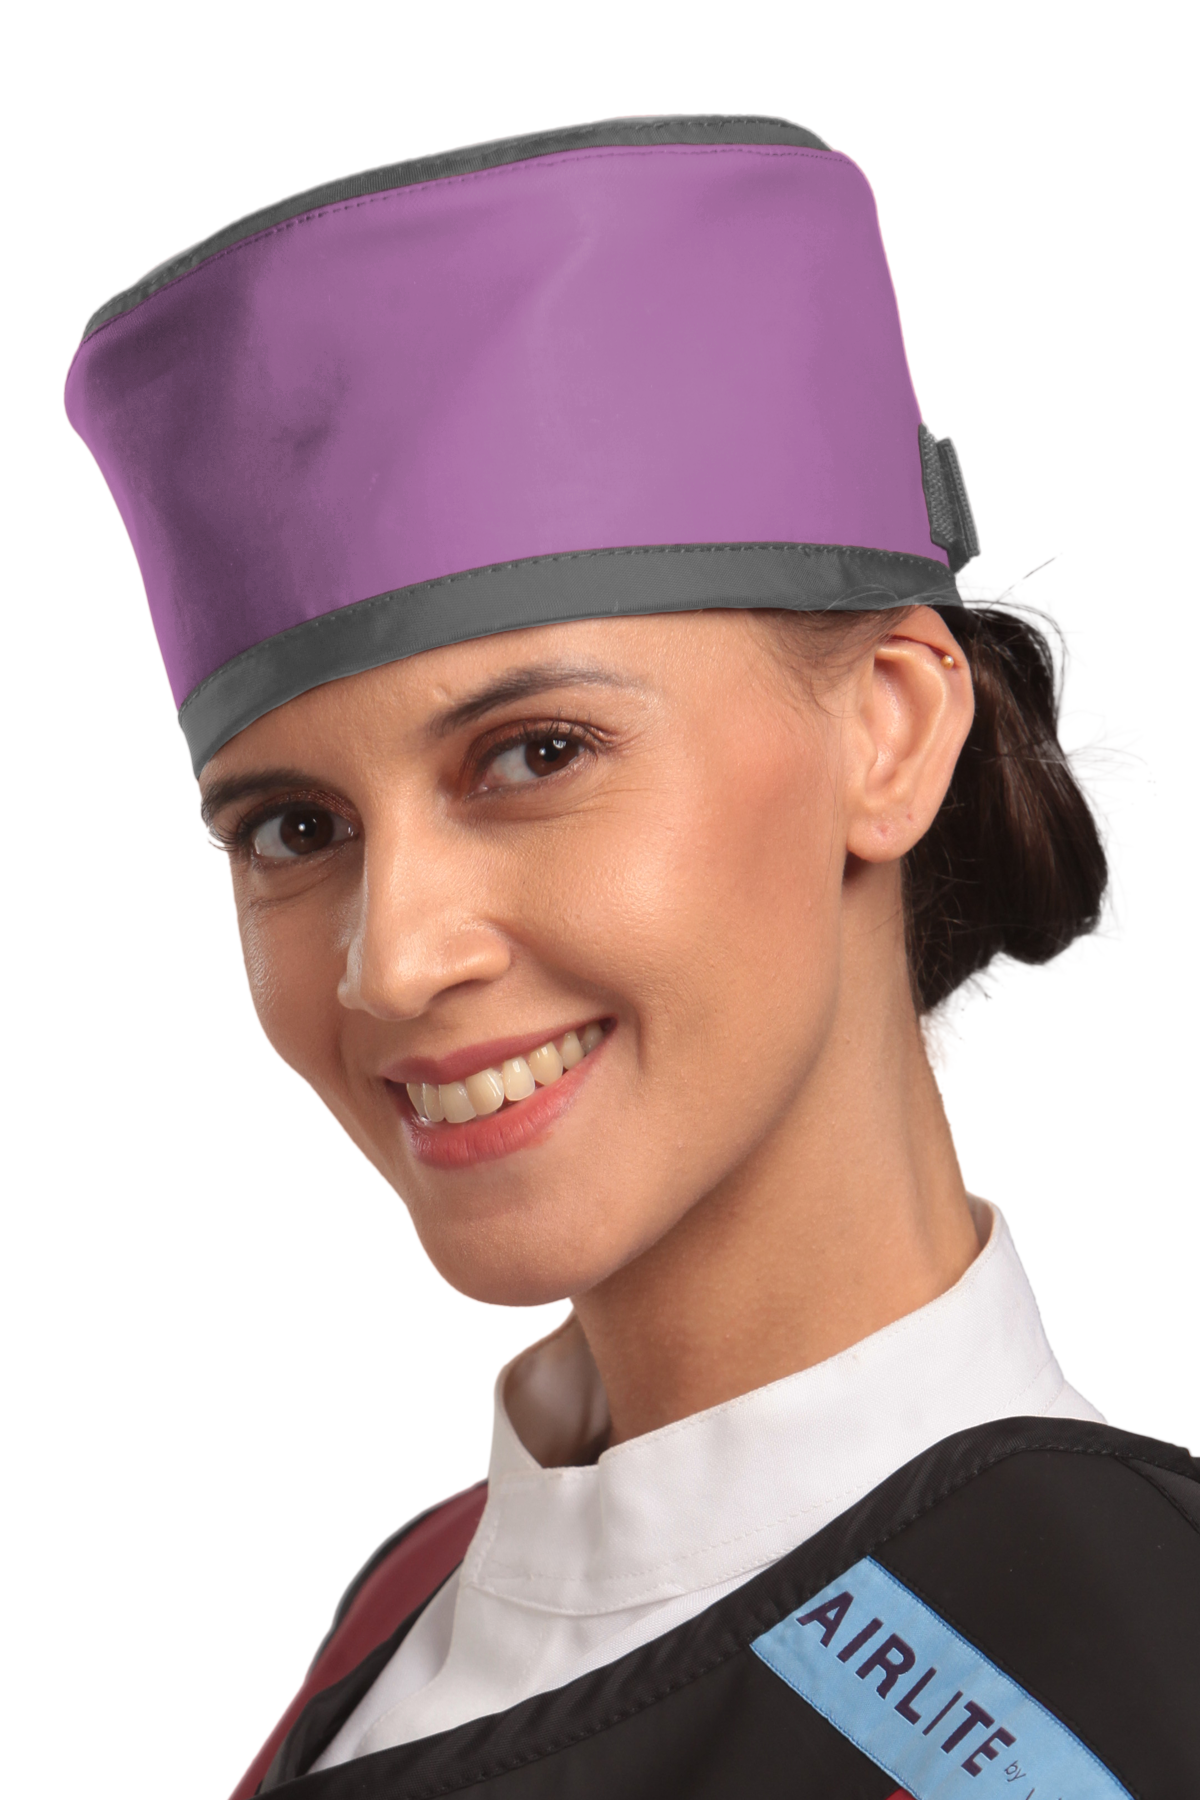 Up-close left-side frontal view of a female model wearing a radiation protection head shield. The head shield is Lilac with grey-colored lines around the lower and upper edges.